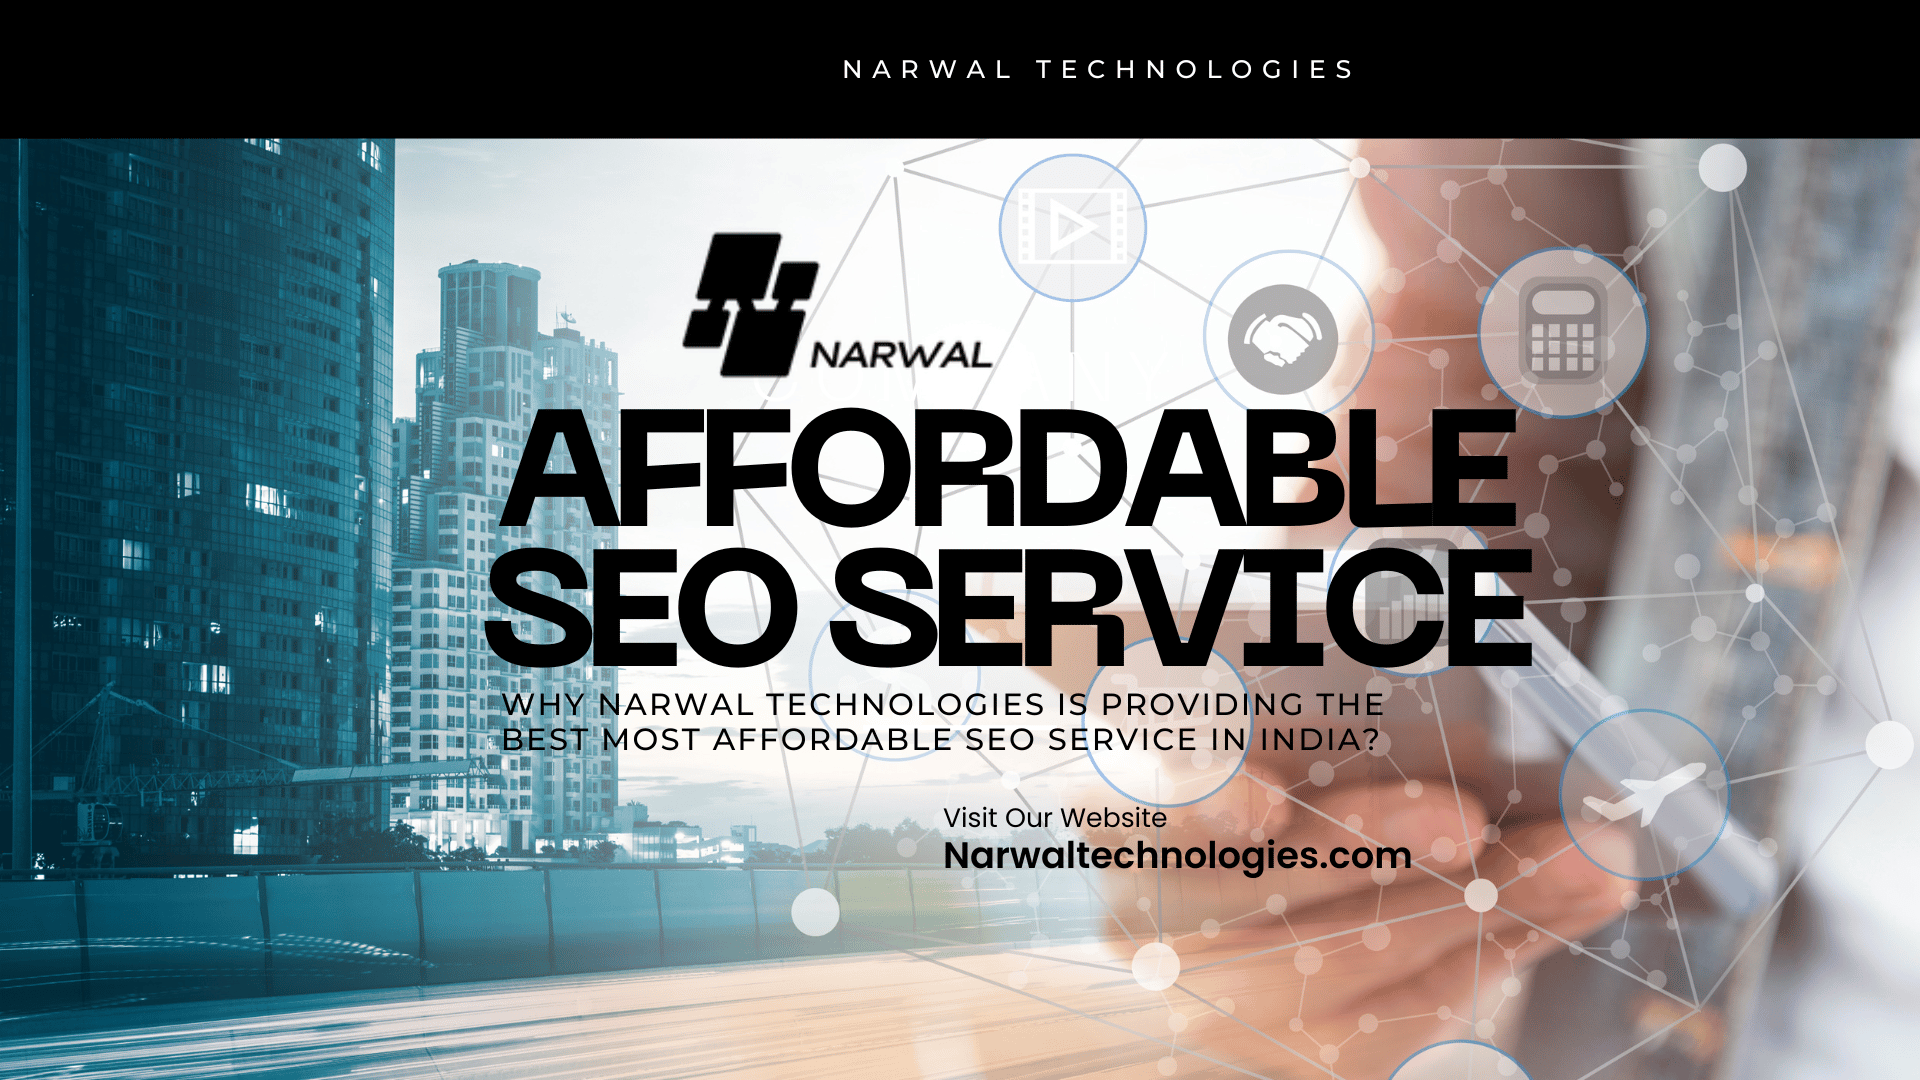 Why Narwal Technologies Is Providing the Best Most Affordable SEO Service in India?